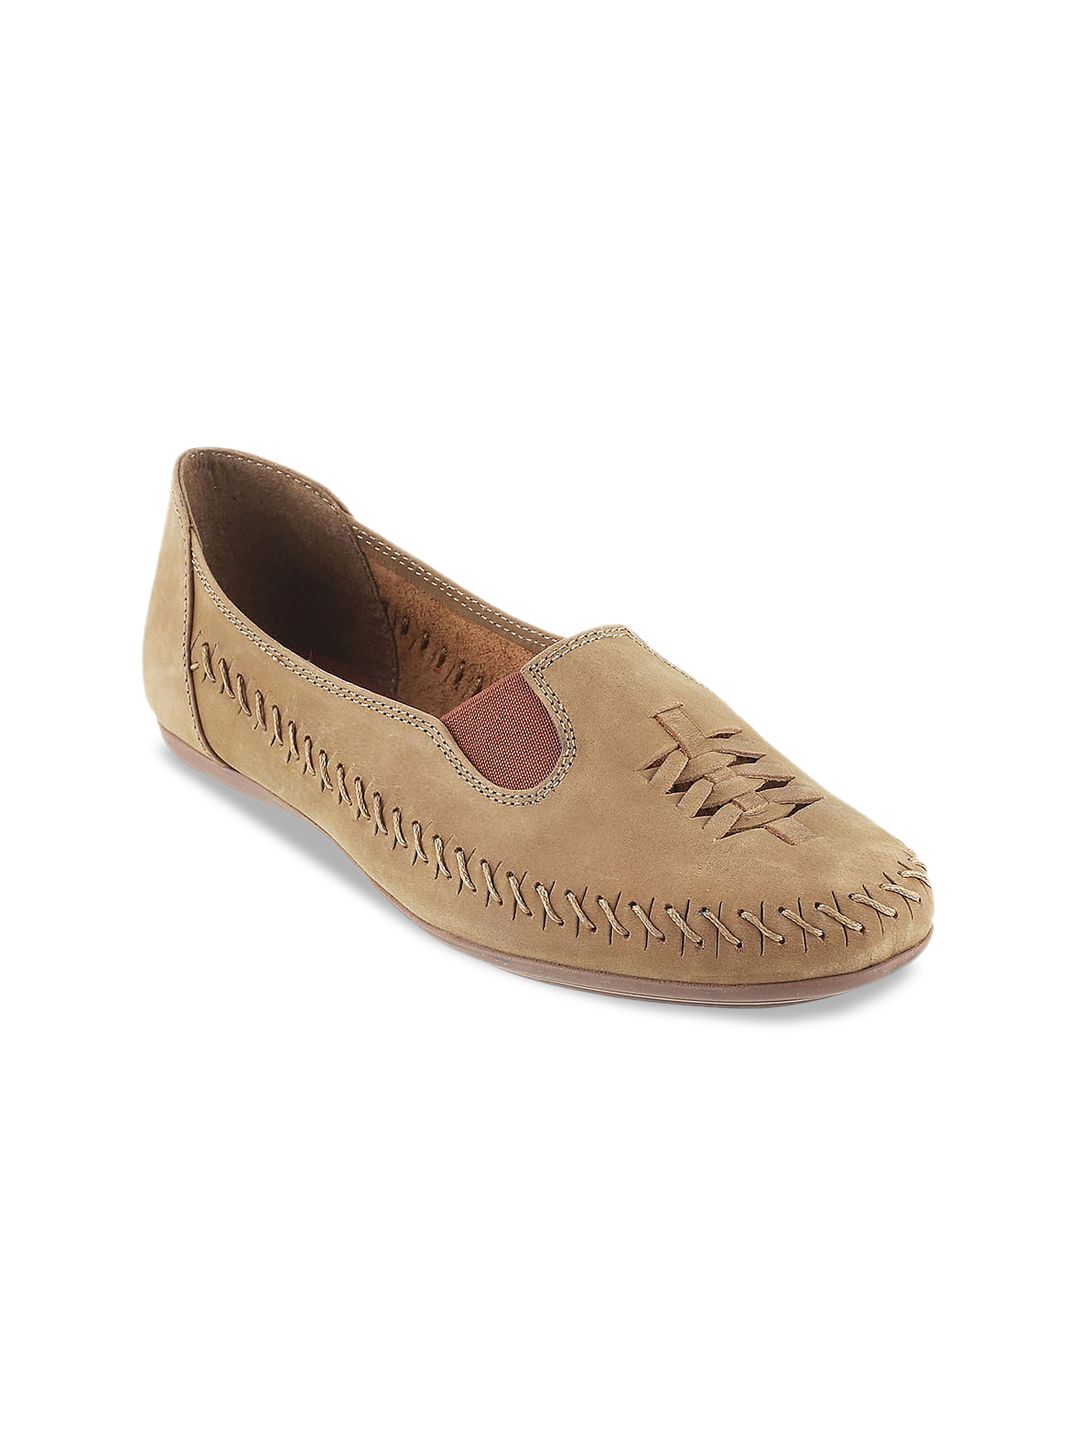 Catwalk Women Stitch Detail Lightweight Leather Loafers Price in India